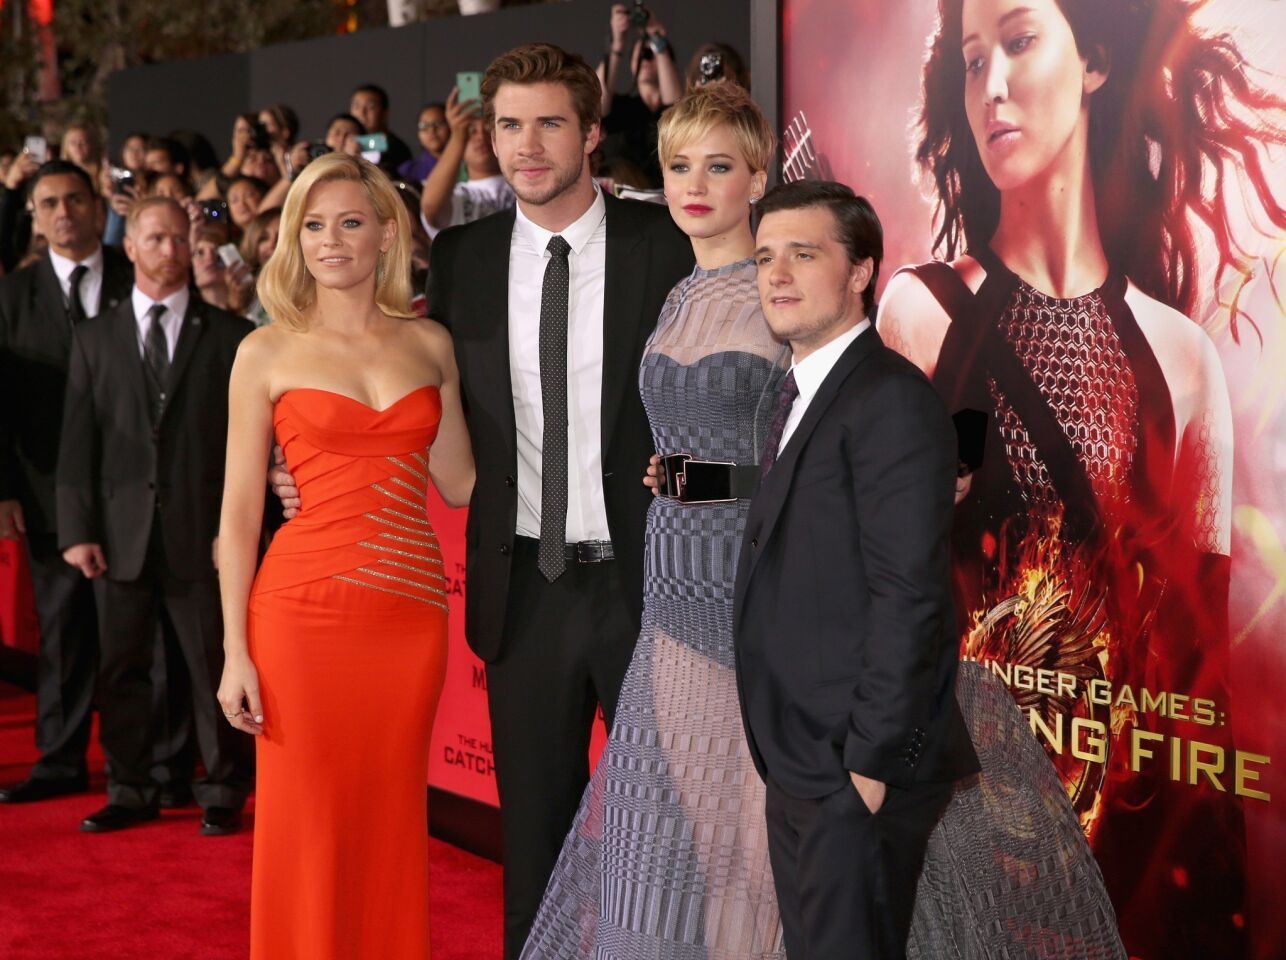 Cast members, from left, Elizabeth Banks, Liam Hemsworth, Jennifer Lawrence and Josh Hutcherson attend the premiere of Lionsgate's "The Hunger Games: Catching Fire" at the Nokia Theatre in Los Angeles.